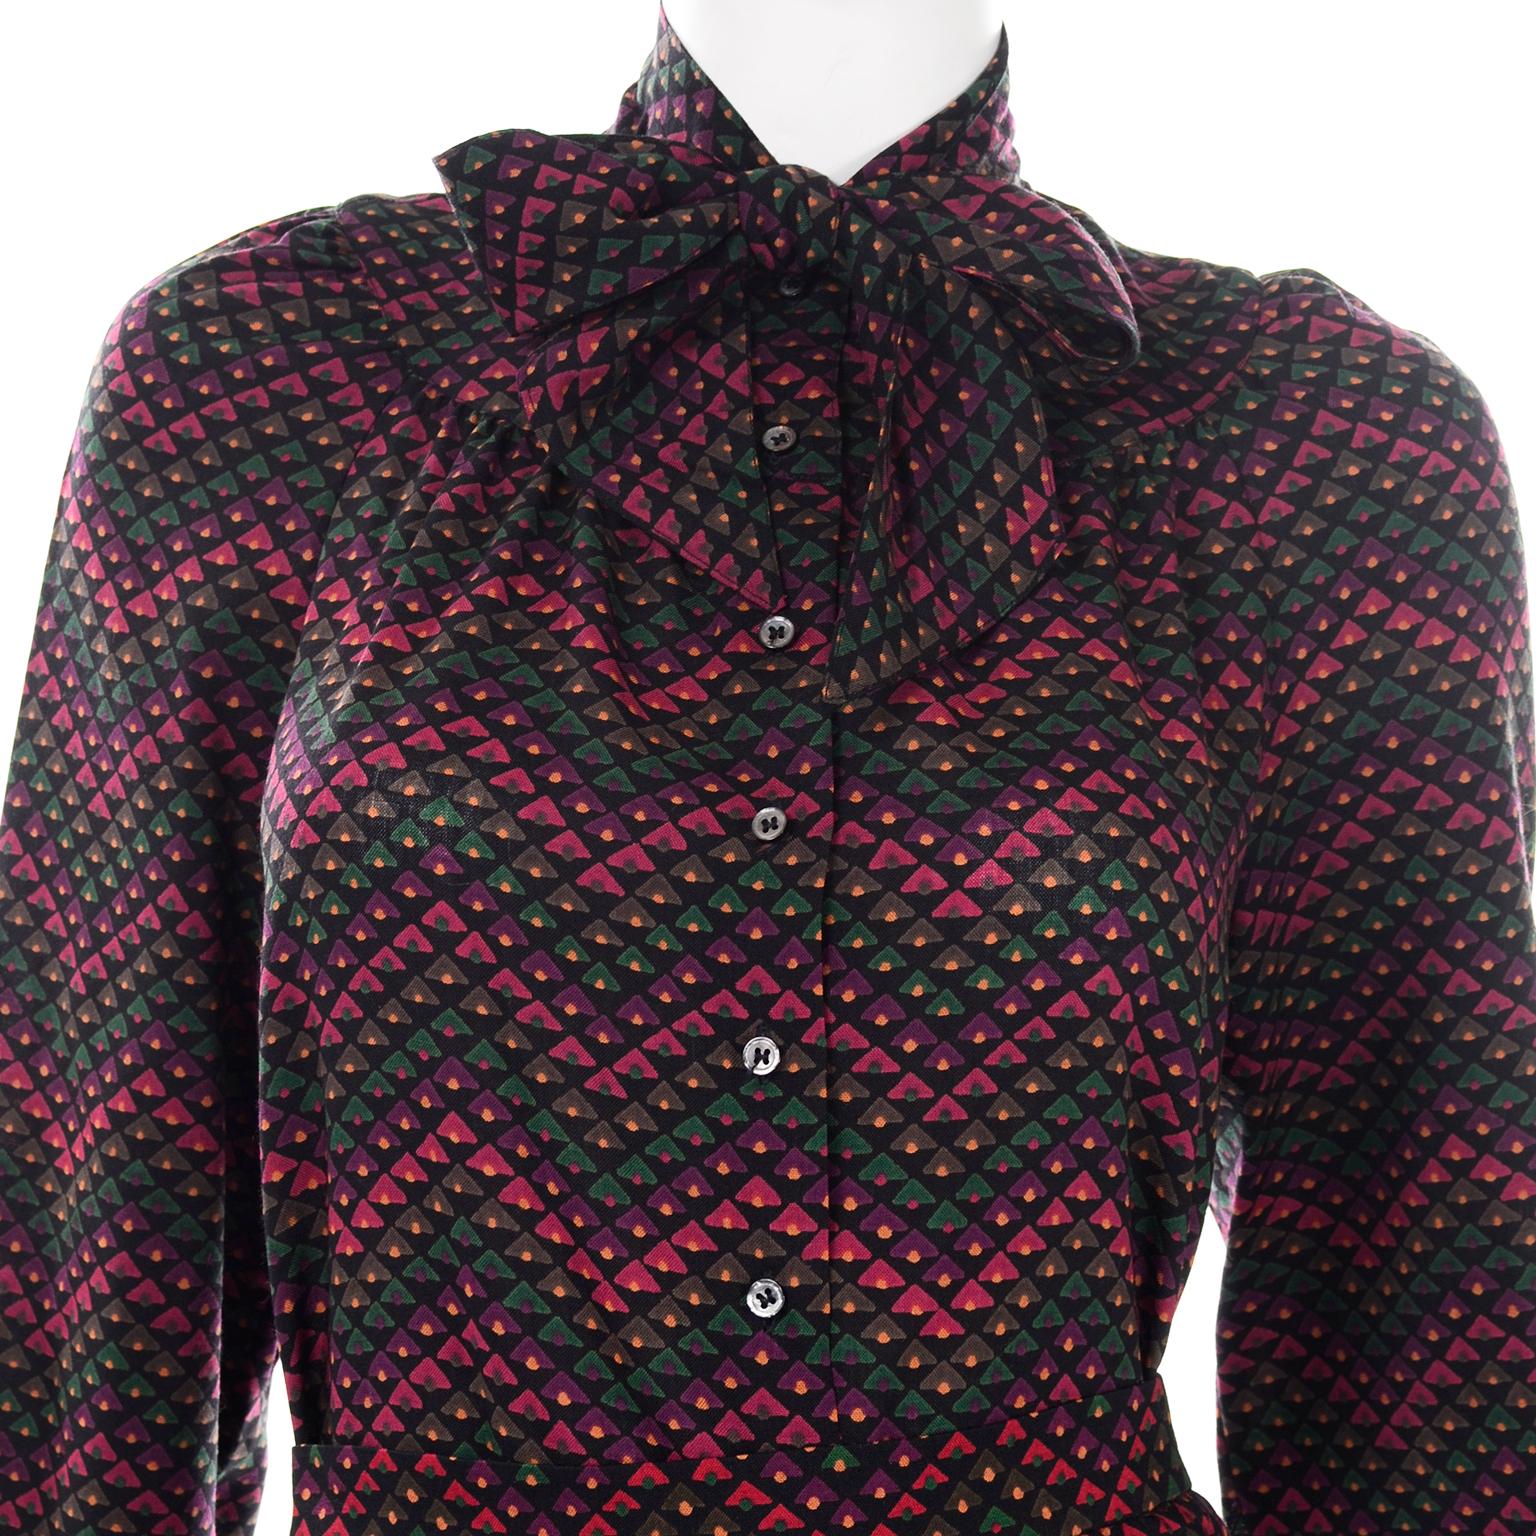 3pc Jaeger Burgundy Velvet Jacket w/  Printed Wool Blouse Top With & Skirt Suit For Sale 4